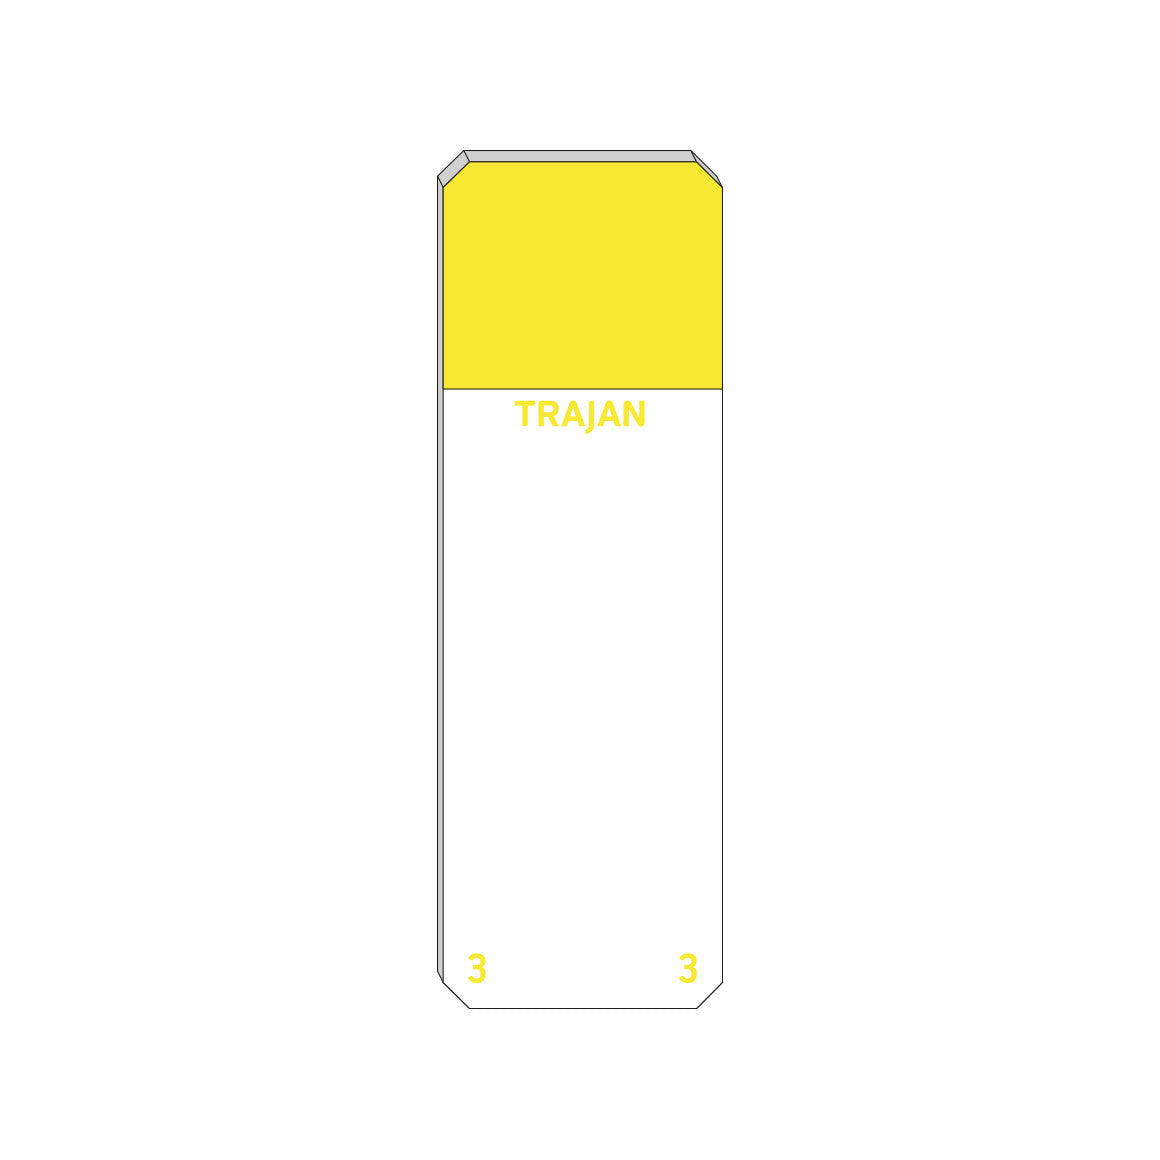 Trajan Scientific and Medical, Series 3 Adhesive Microscope Slides, Yellow, Frost 20 mm, 75 mm x 25 mm